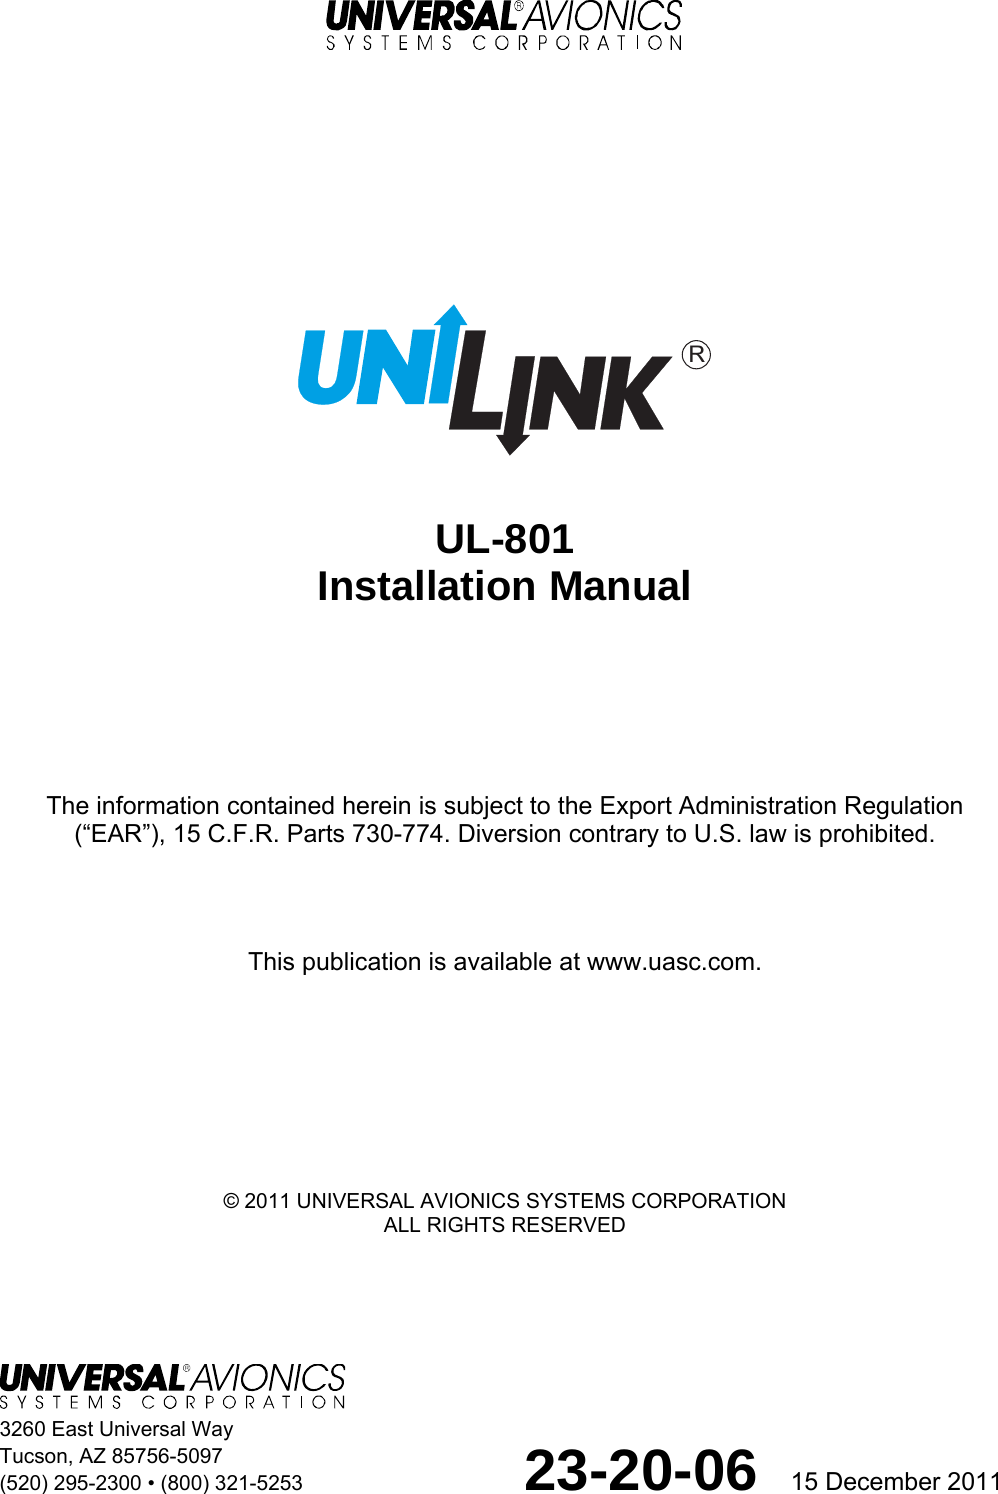     3260 East Universal Way Tucson, AZ 85756-5097 (520) 295-2300 • (800) 321-5253                     23-20-06  15 December 2011         UL-801 Installation Manual      The information contained herein is subject to the Export Administration Regulation  (“EAR”), 15 C.F.R. Parts 730-774. Diversion contrary to U.S. law is prohibited.    This publication is available at www.uasc.com.        © 2011 UNIVERSAL AVIONICS SYSTEMS CORPORATION ALL RIGHTS RESERVED R